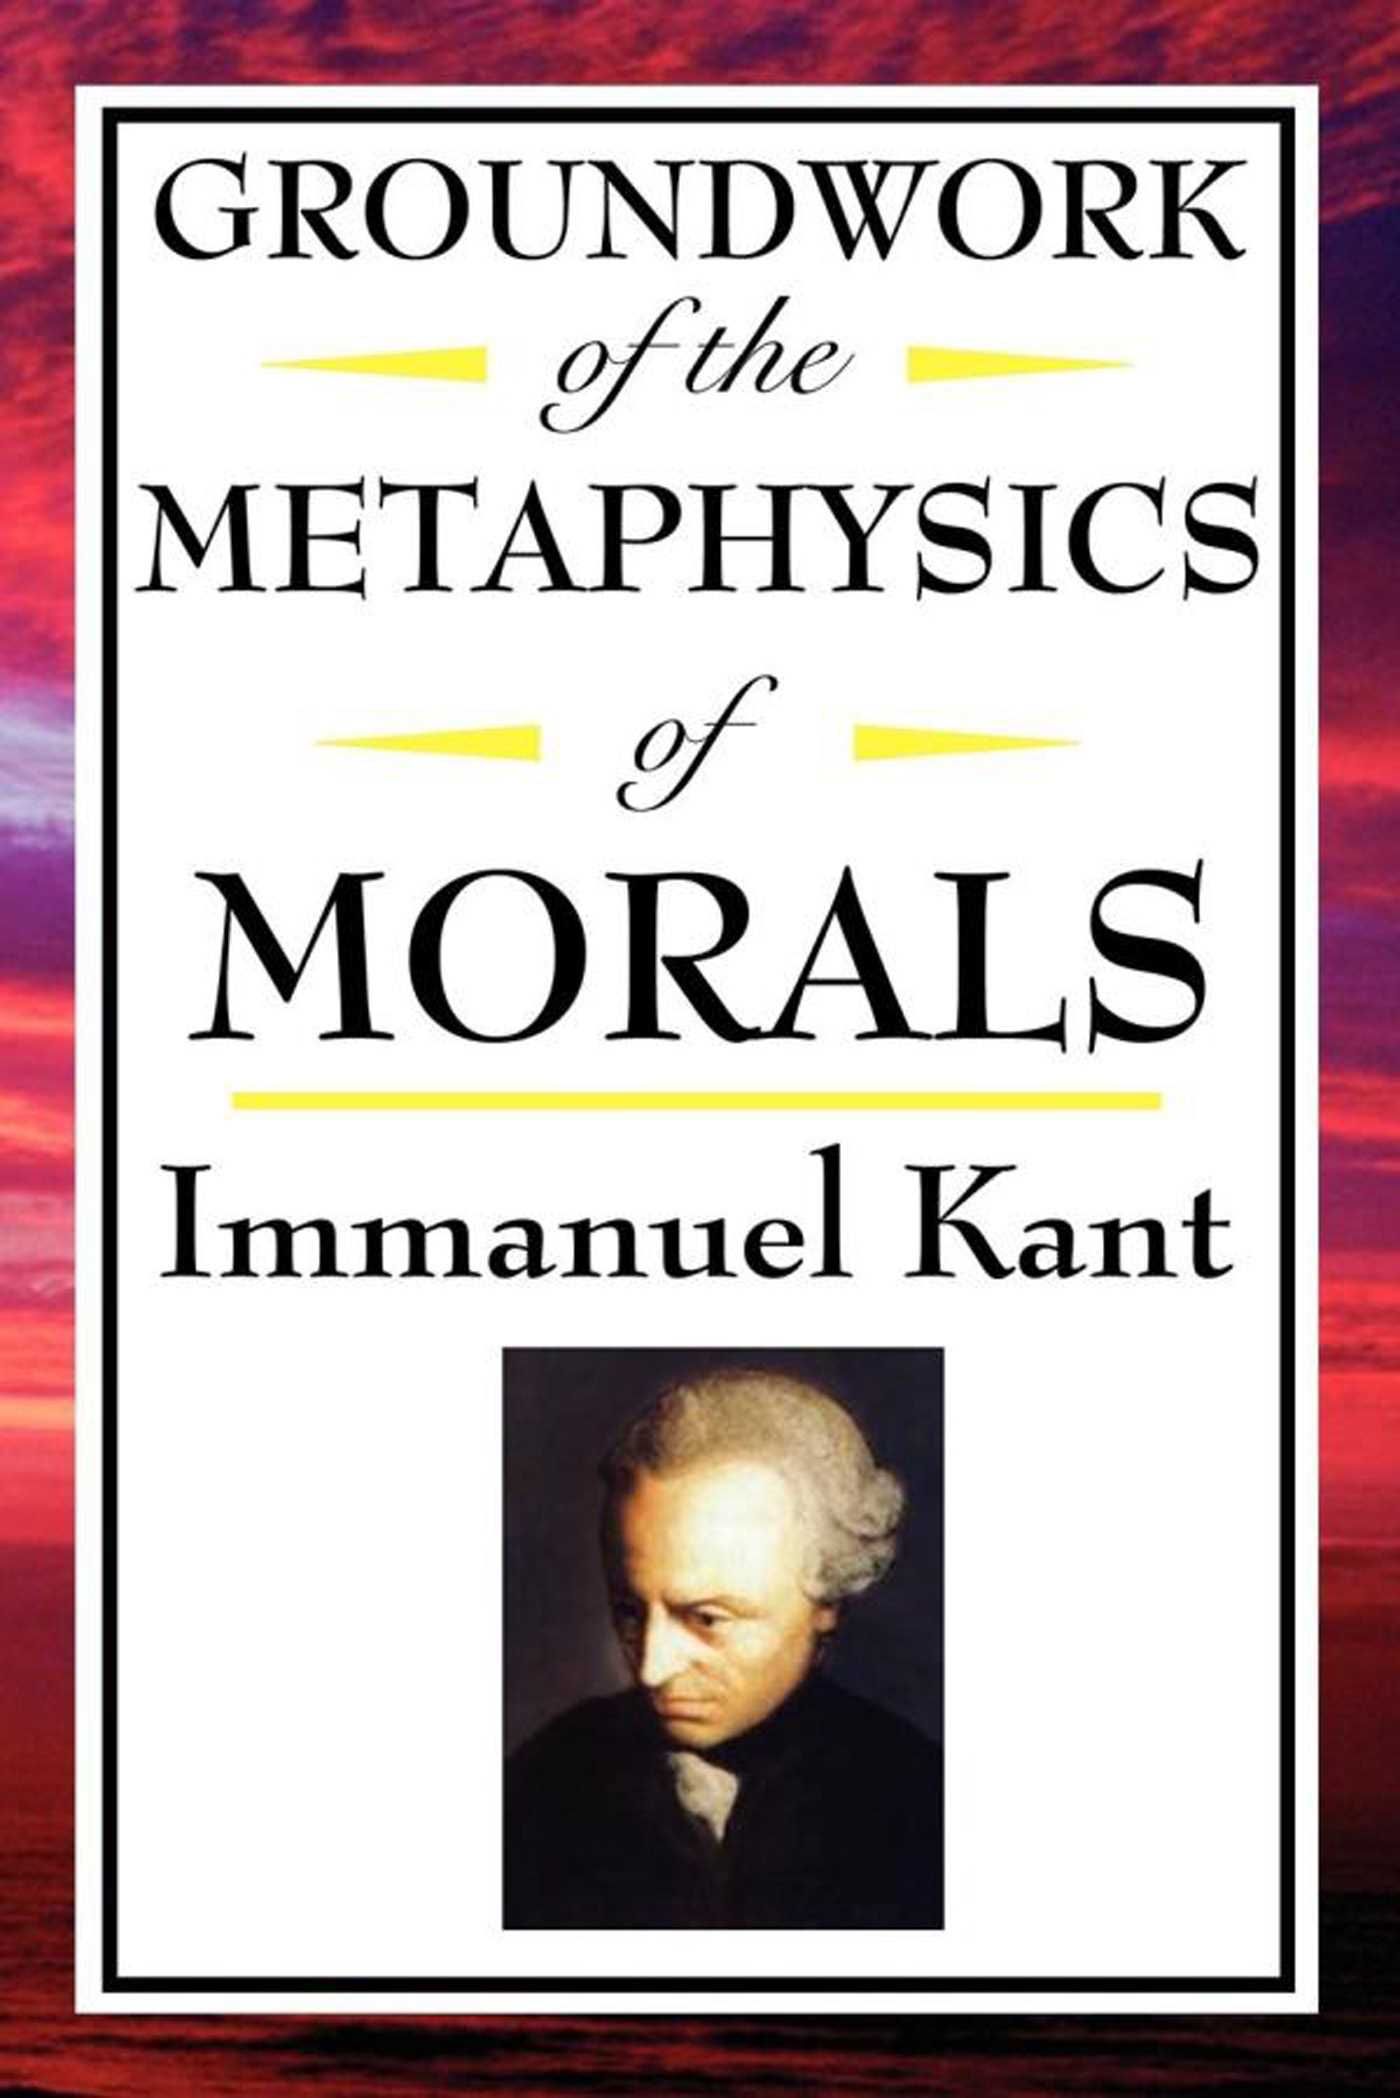 groundwork of the metaphysics of morals 9781625588586 hr